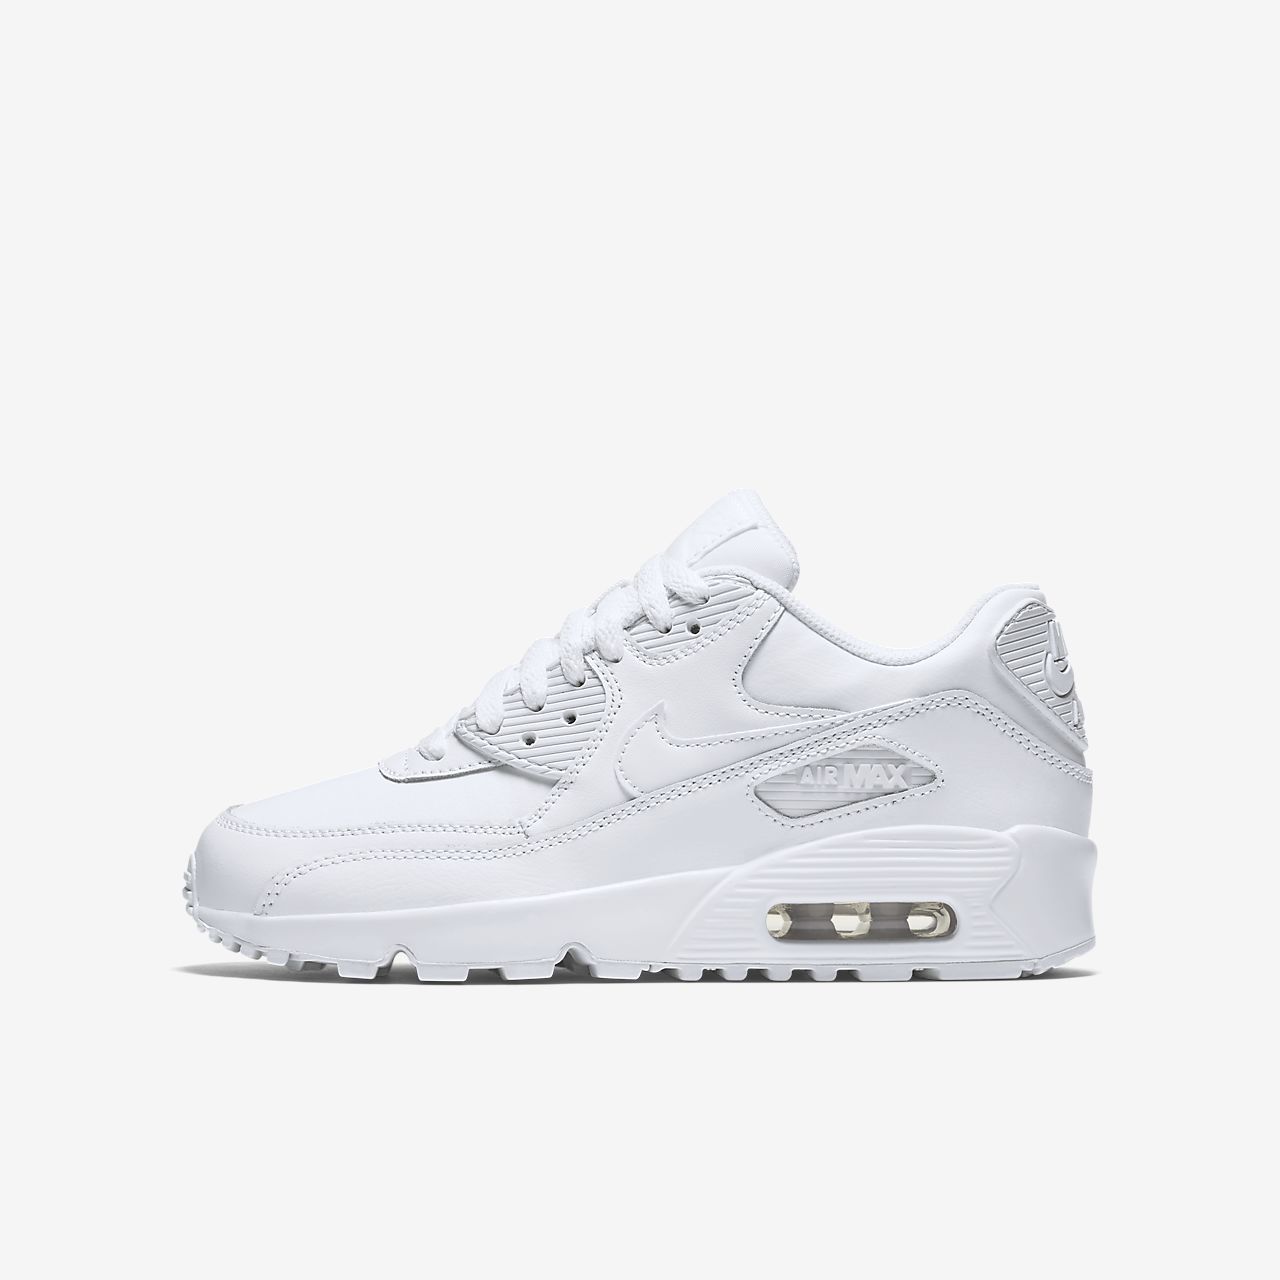 nike air max 90 leather blanche